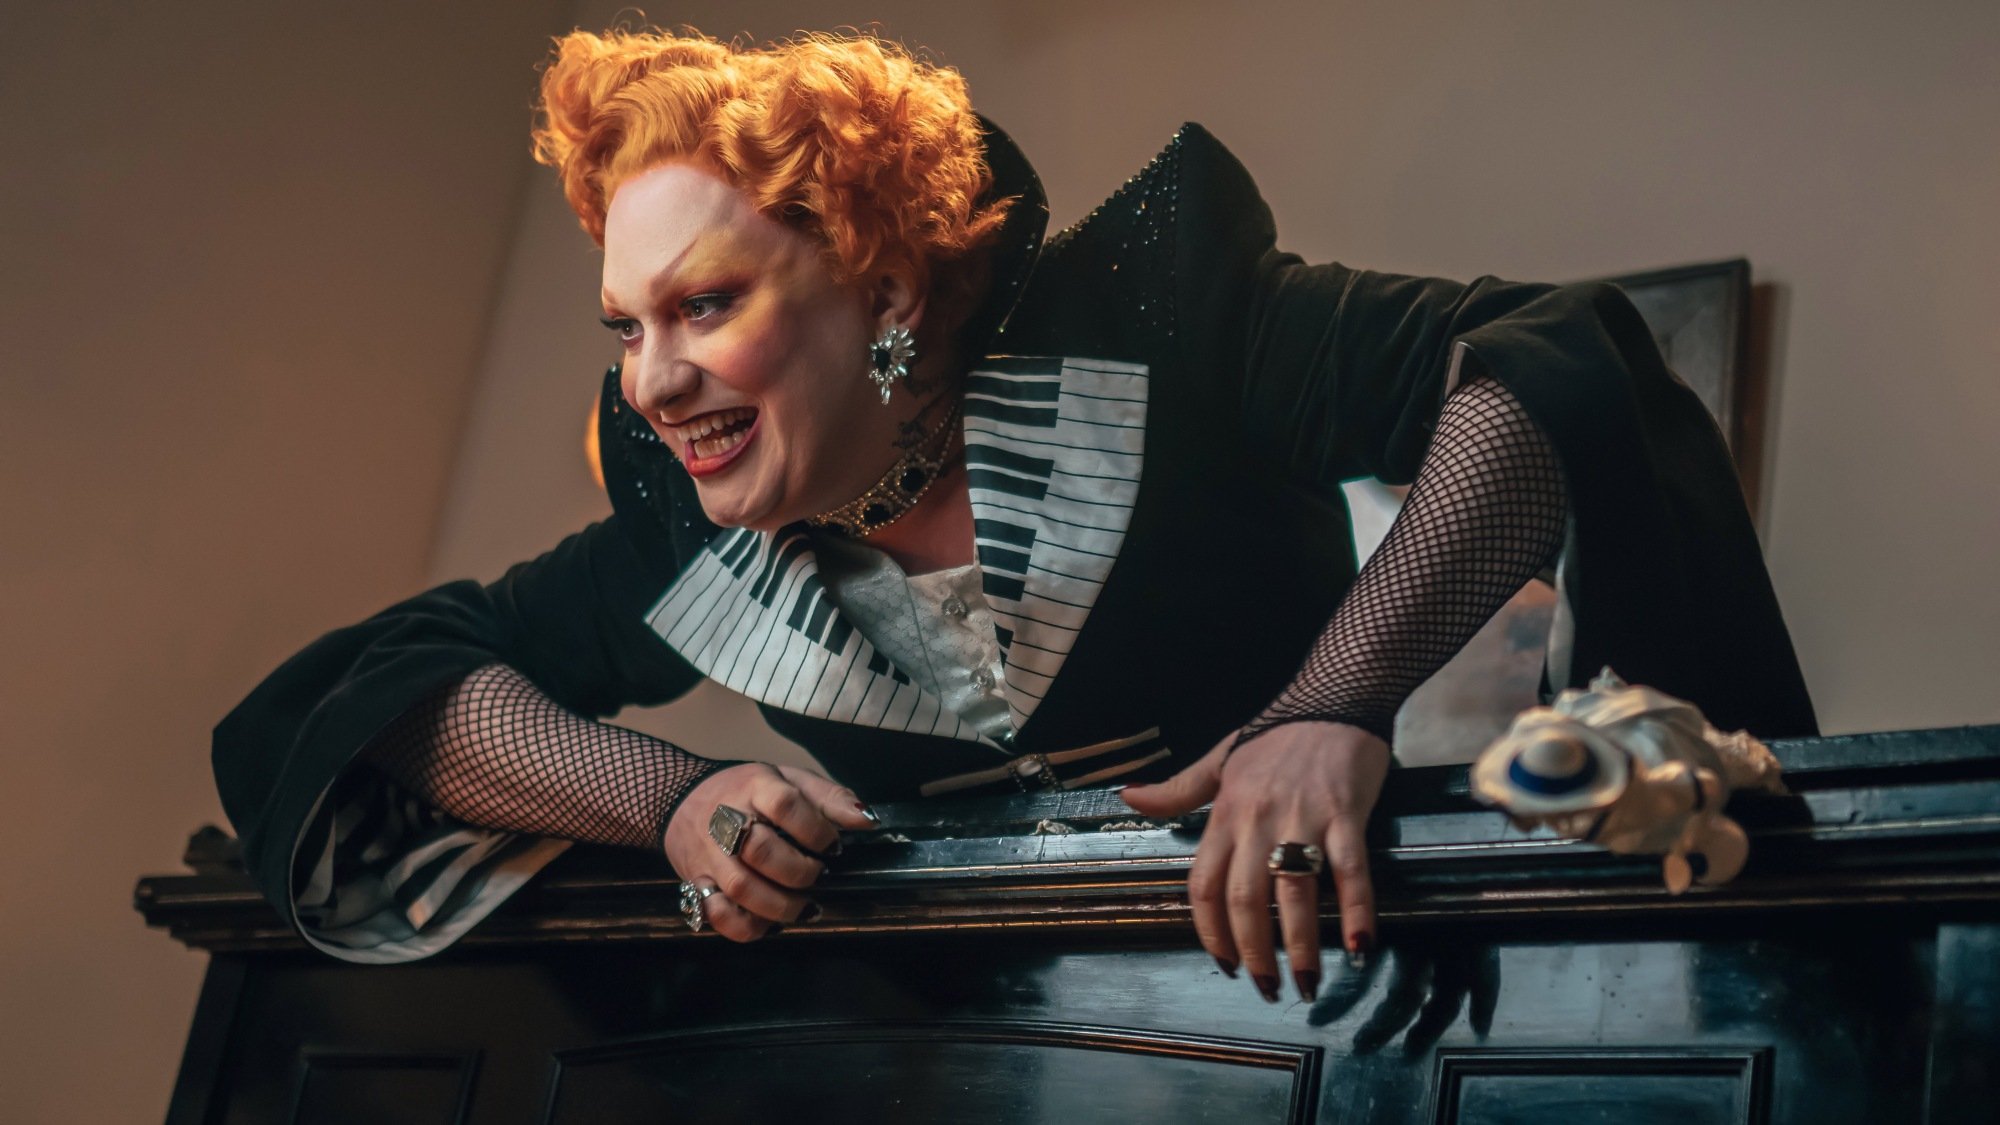 Jinkx Monsoon as The Maestro in "Doctor Who."